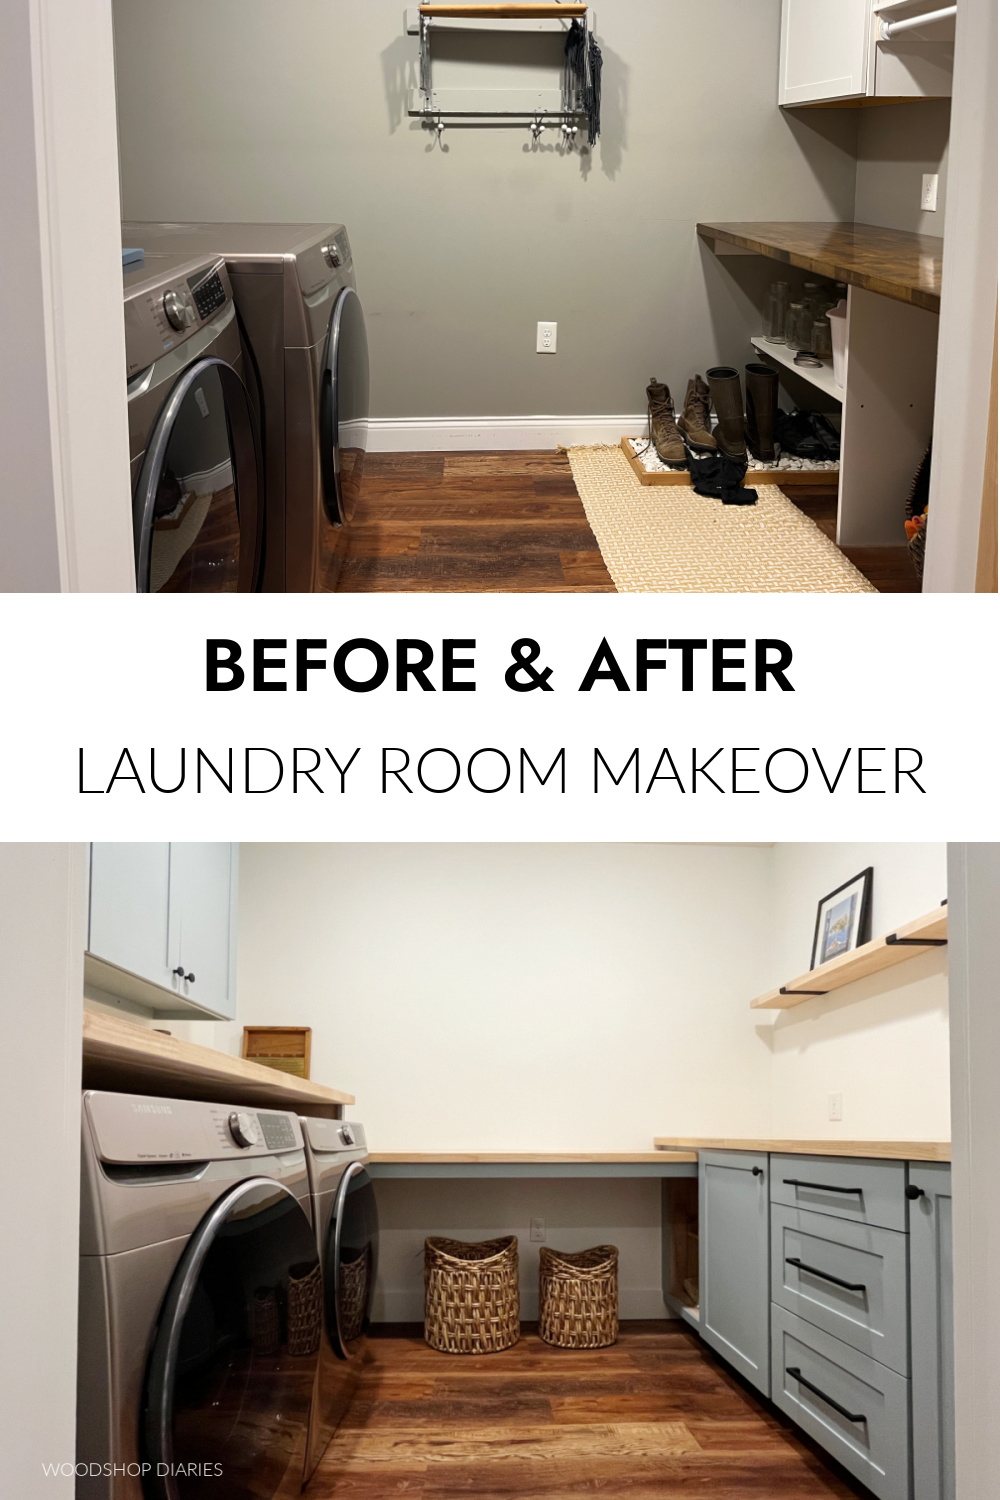 Pinterest collage image showing before laundry room at top and after laundry room remodel with built in cabinets at bottom 